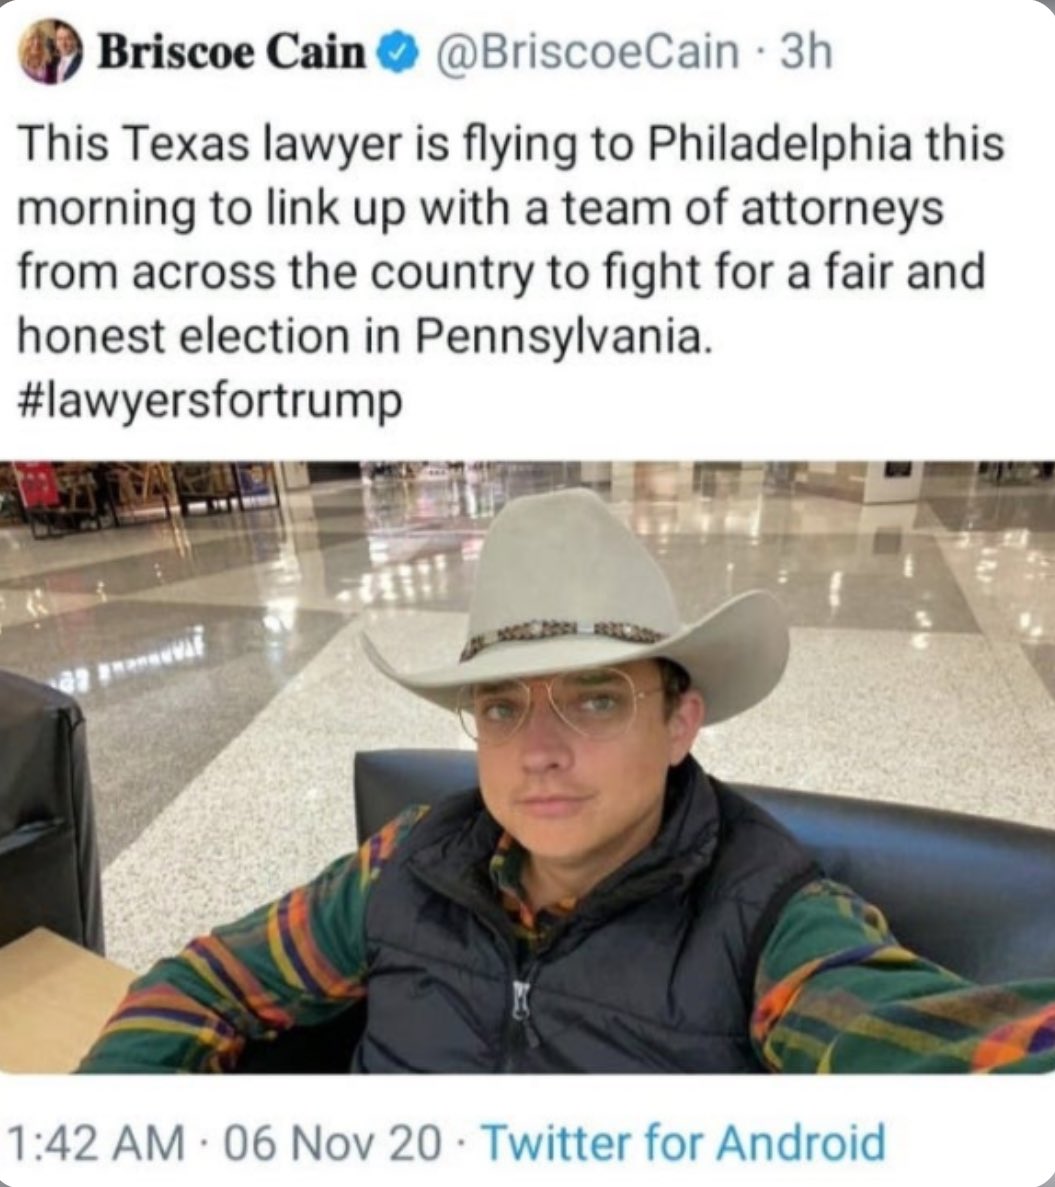 This is some real Briscoe flying to Pennsylvania to “stop the steal” energy.

Who keeps letting our 🤡 out of the car? 

#MAGACircus
#CrewsForHD128